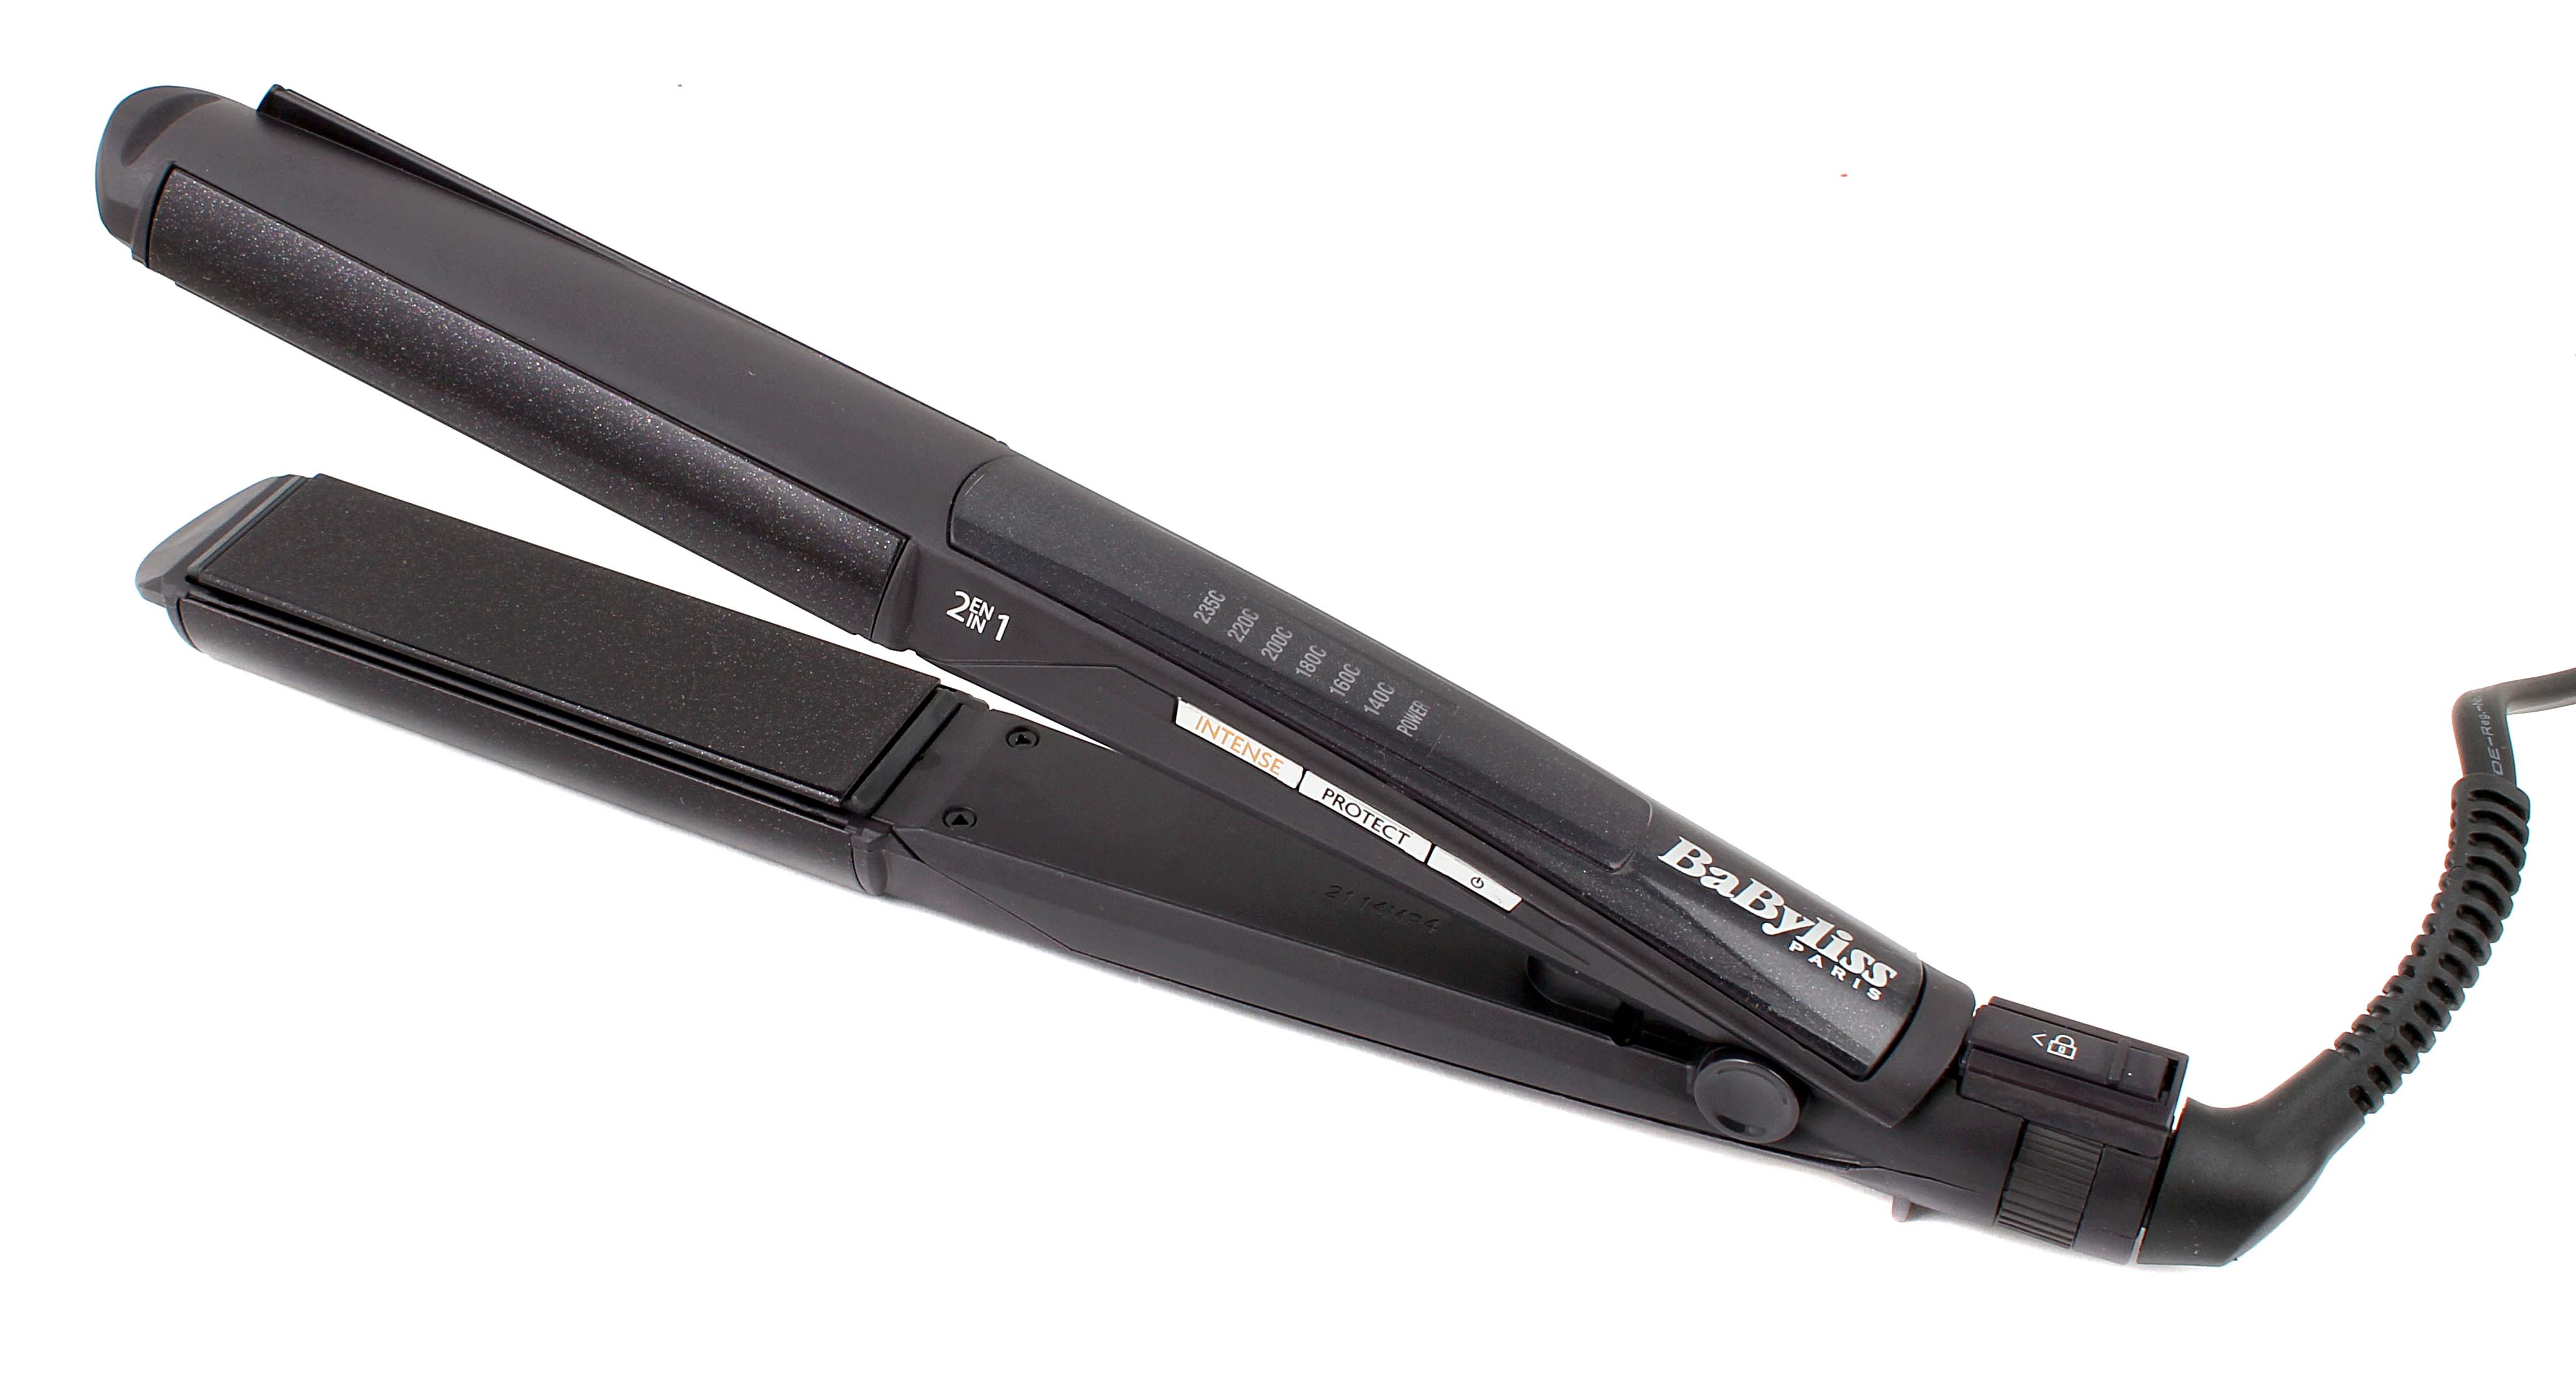     Babyliss - Babyliss  : 235 ;   : ; : ;  : <br>